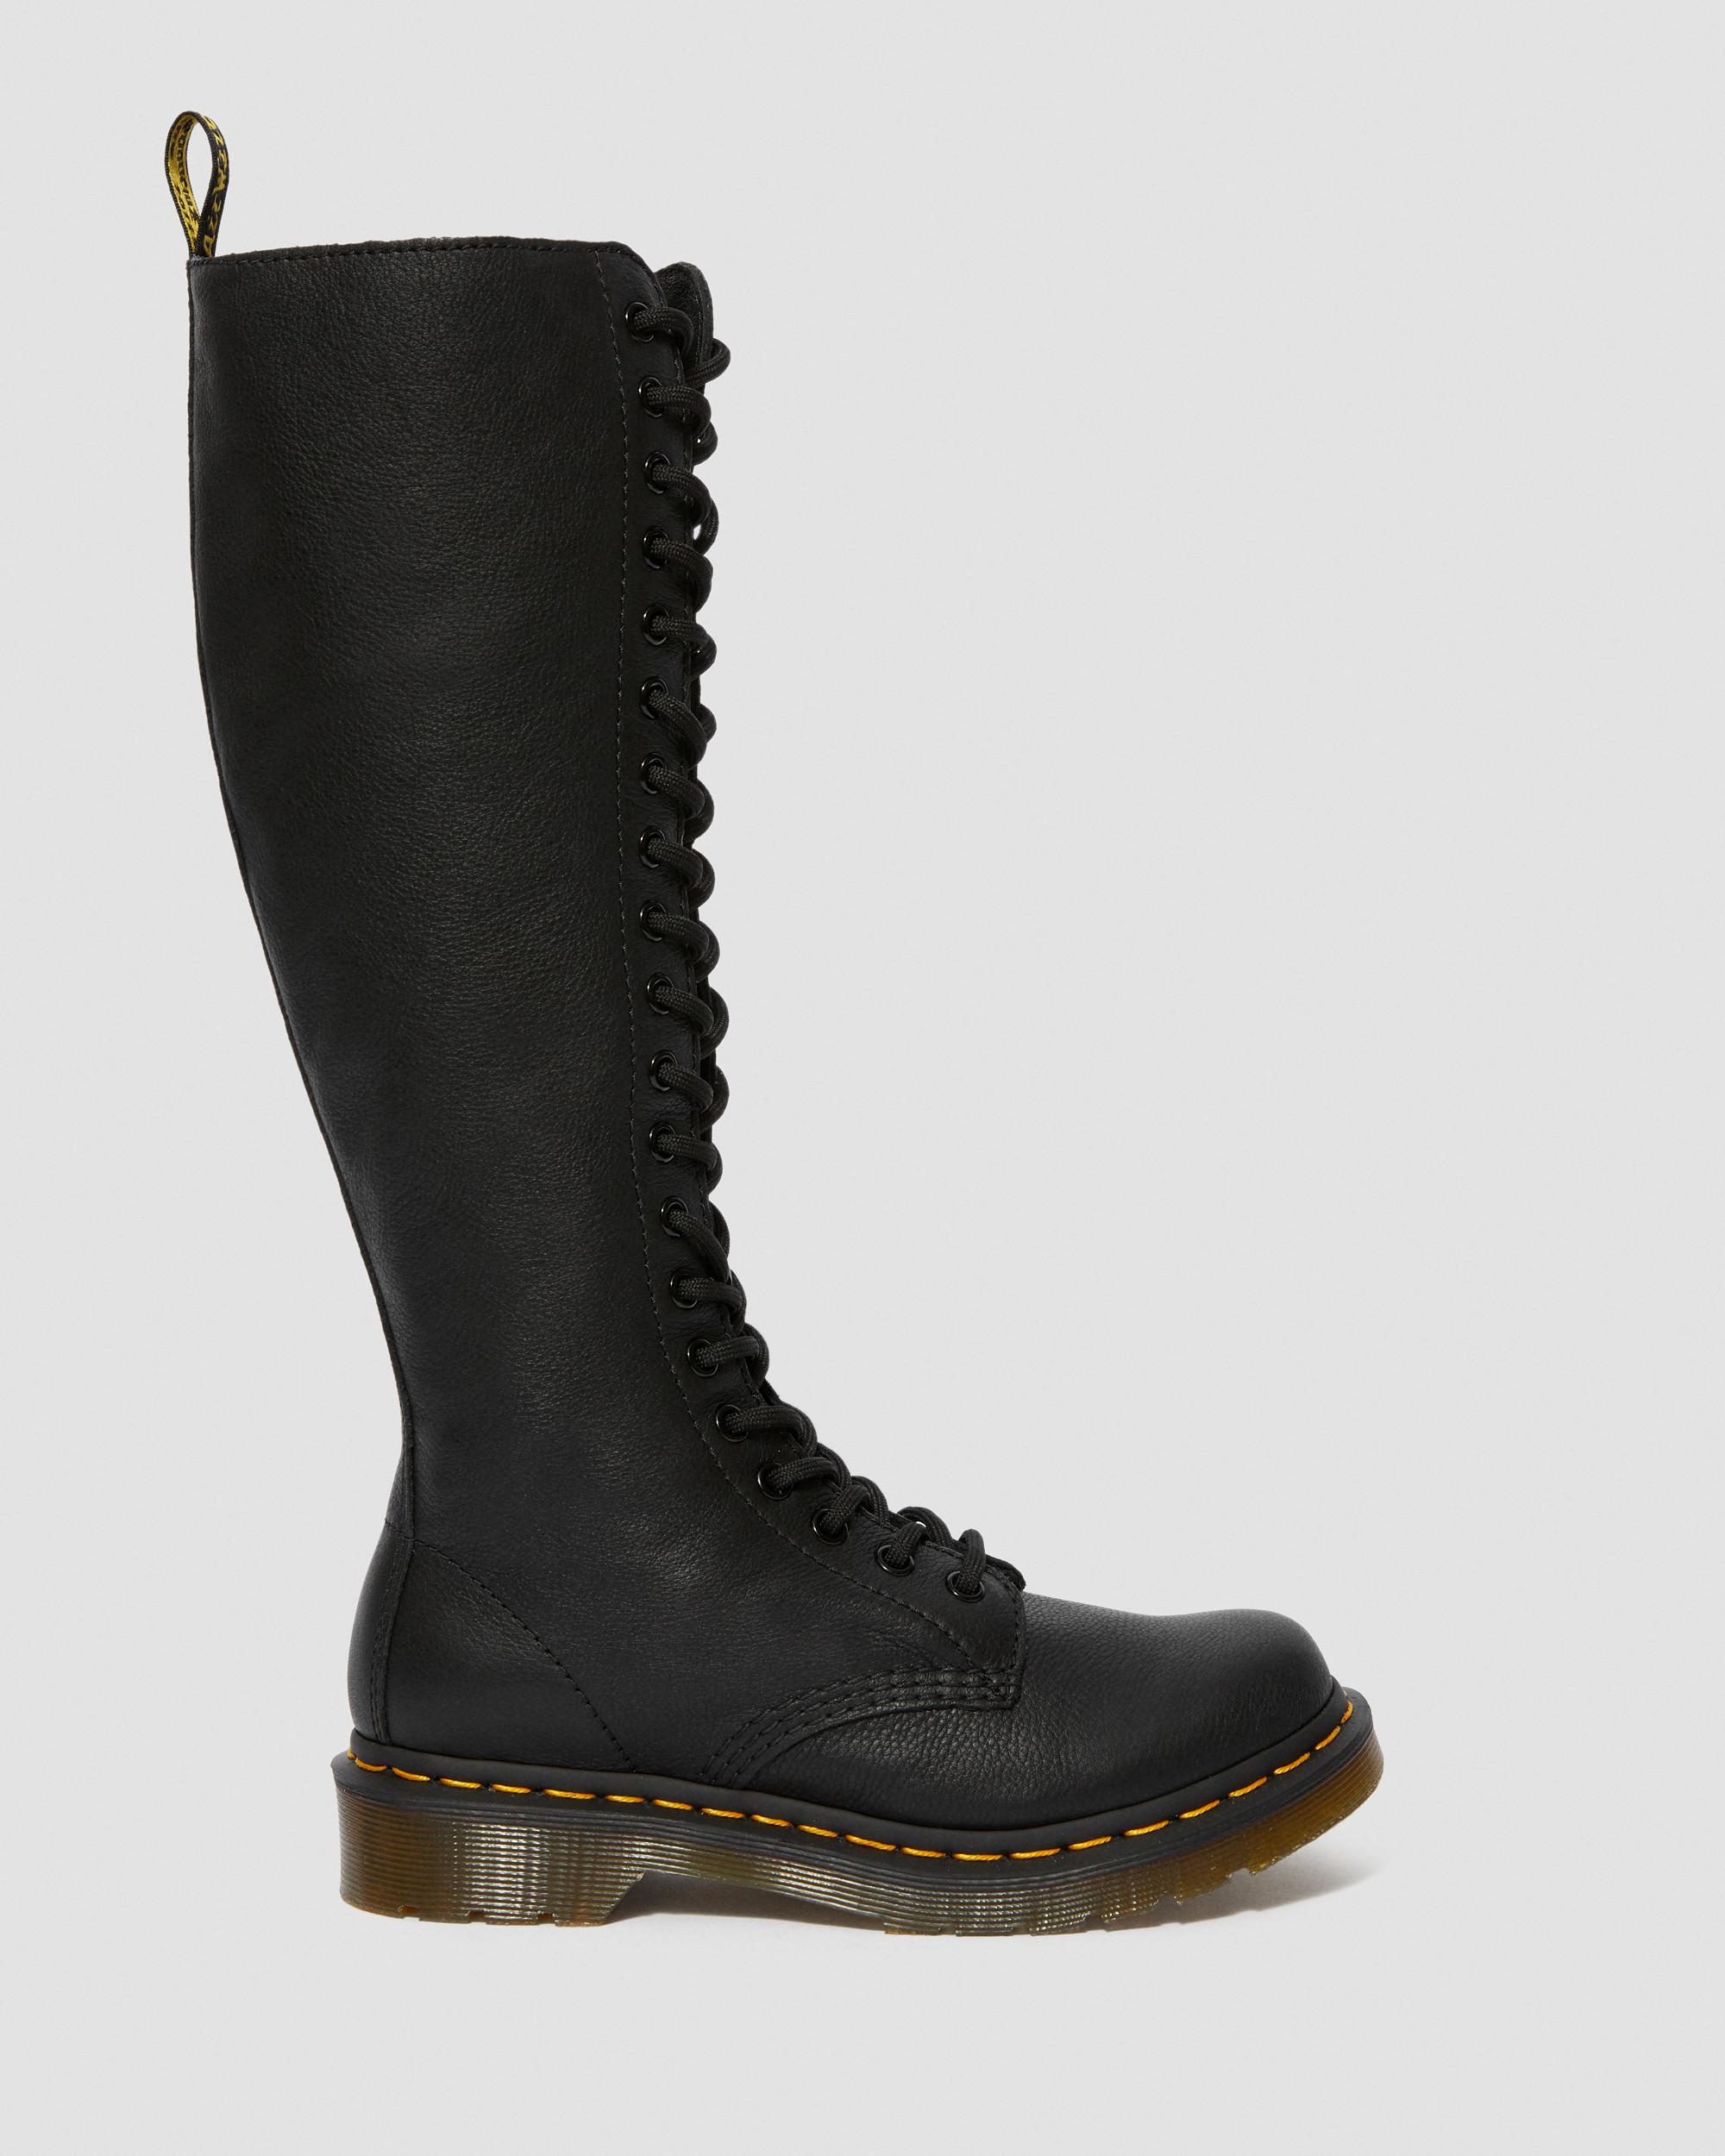 1B60 BLACK1B60 VIRGINIA LEATHER EXTRA HIGH BOOTS Dr. Martens